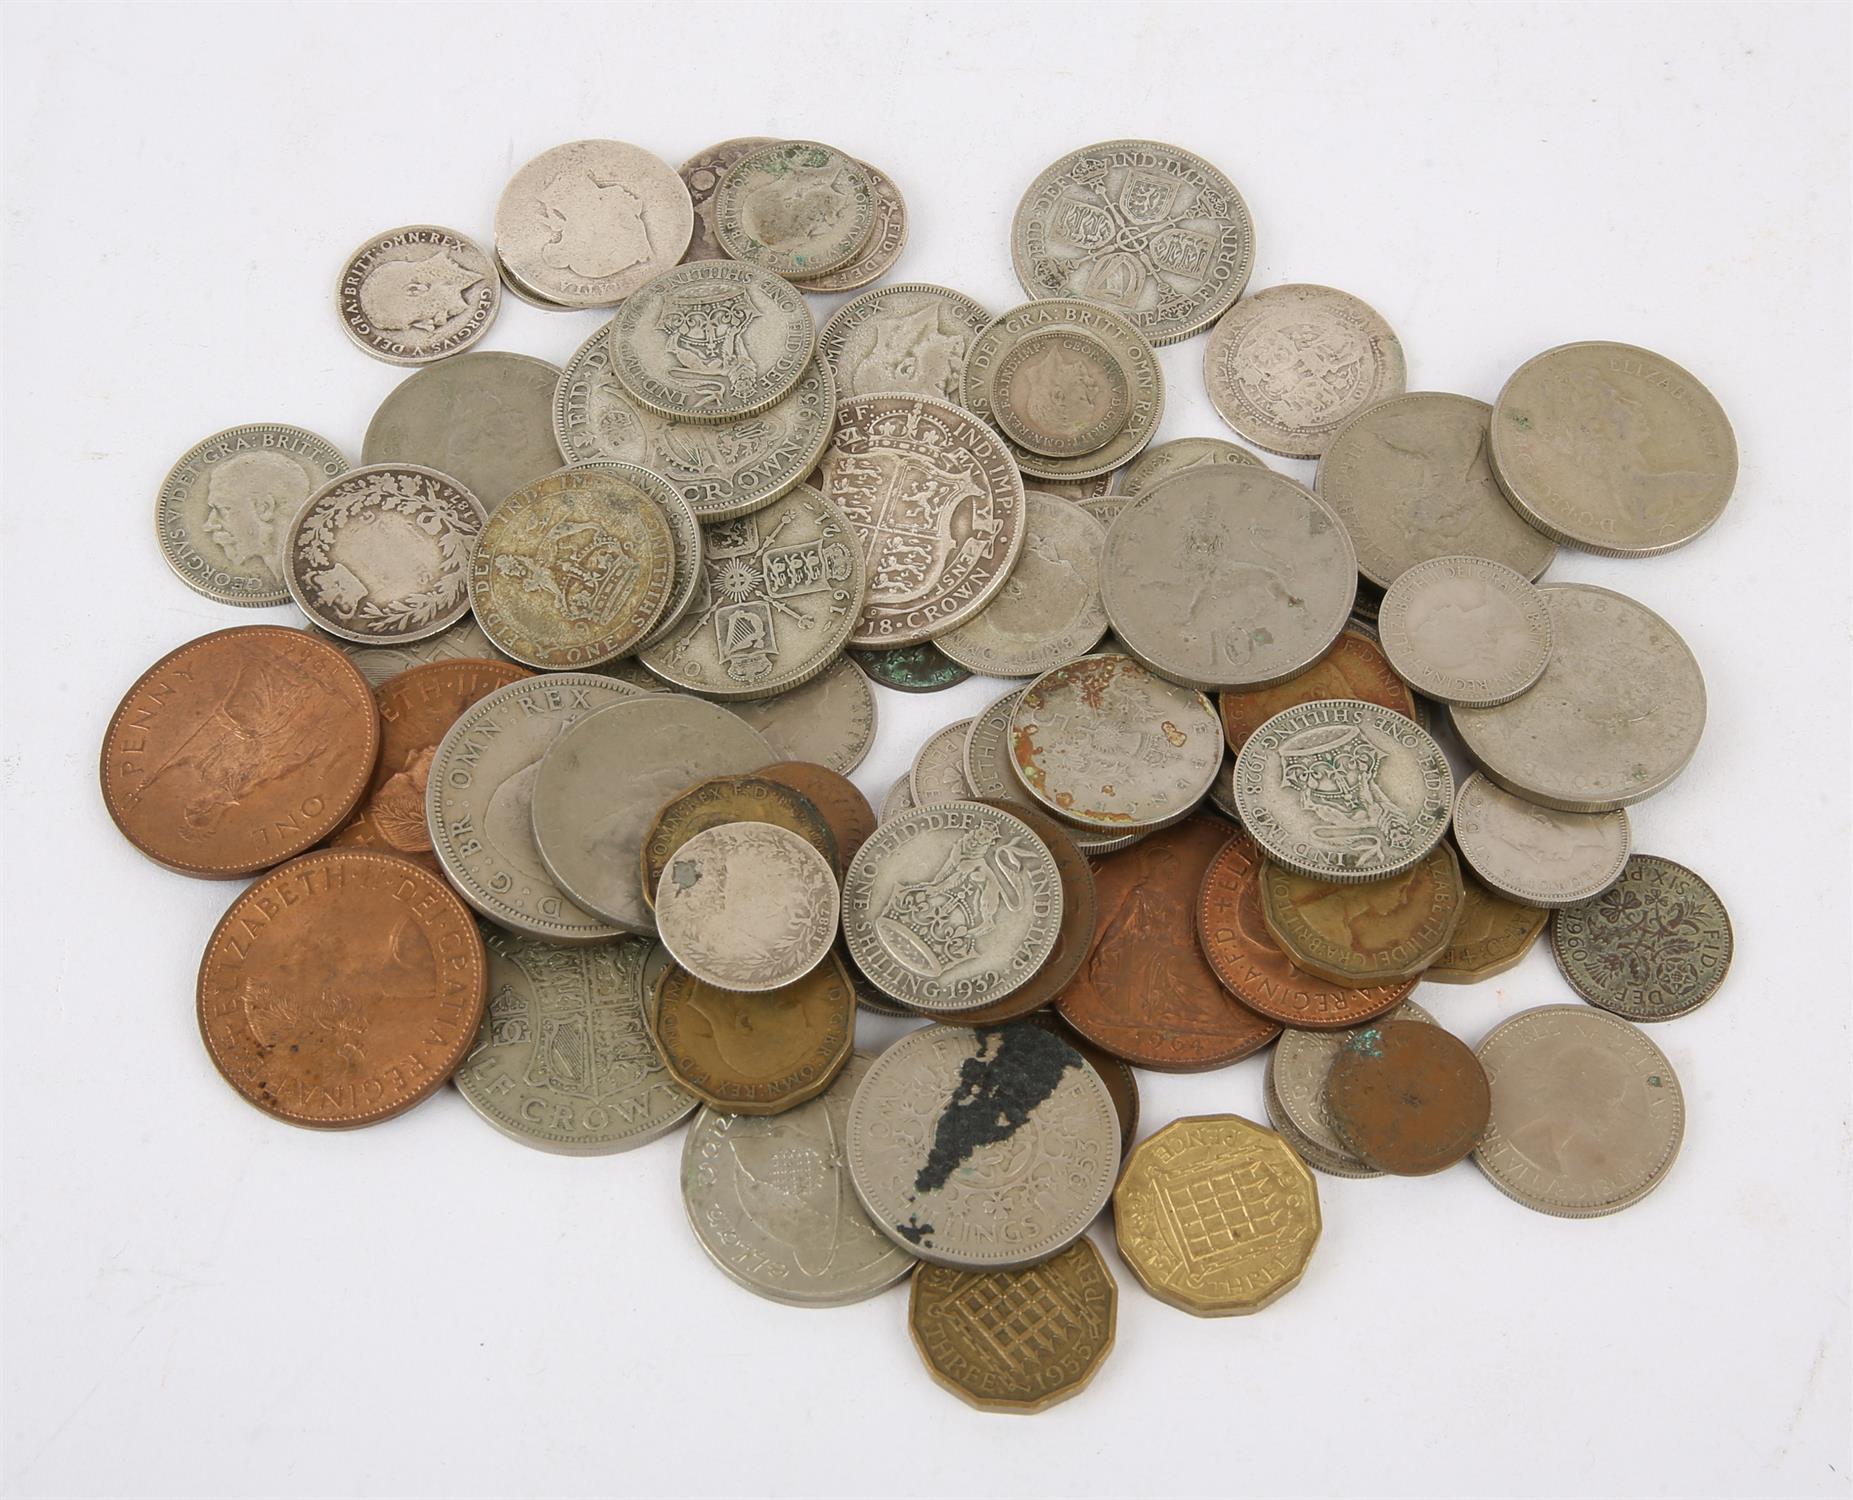 A small collection of pre-decimal circulated British coins, including about 28 shillings face value